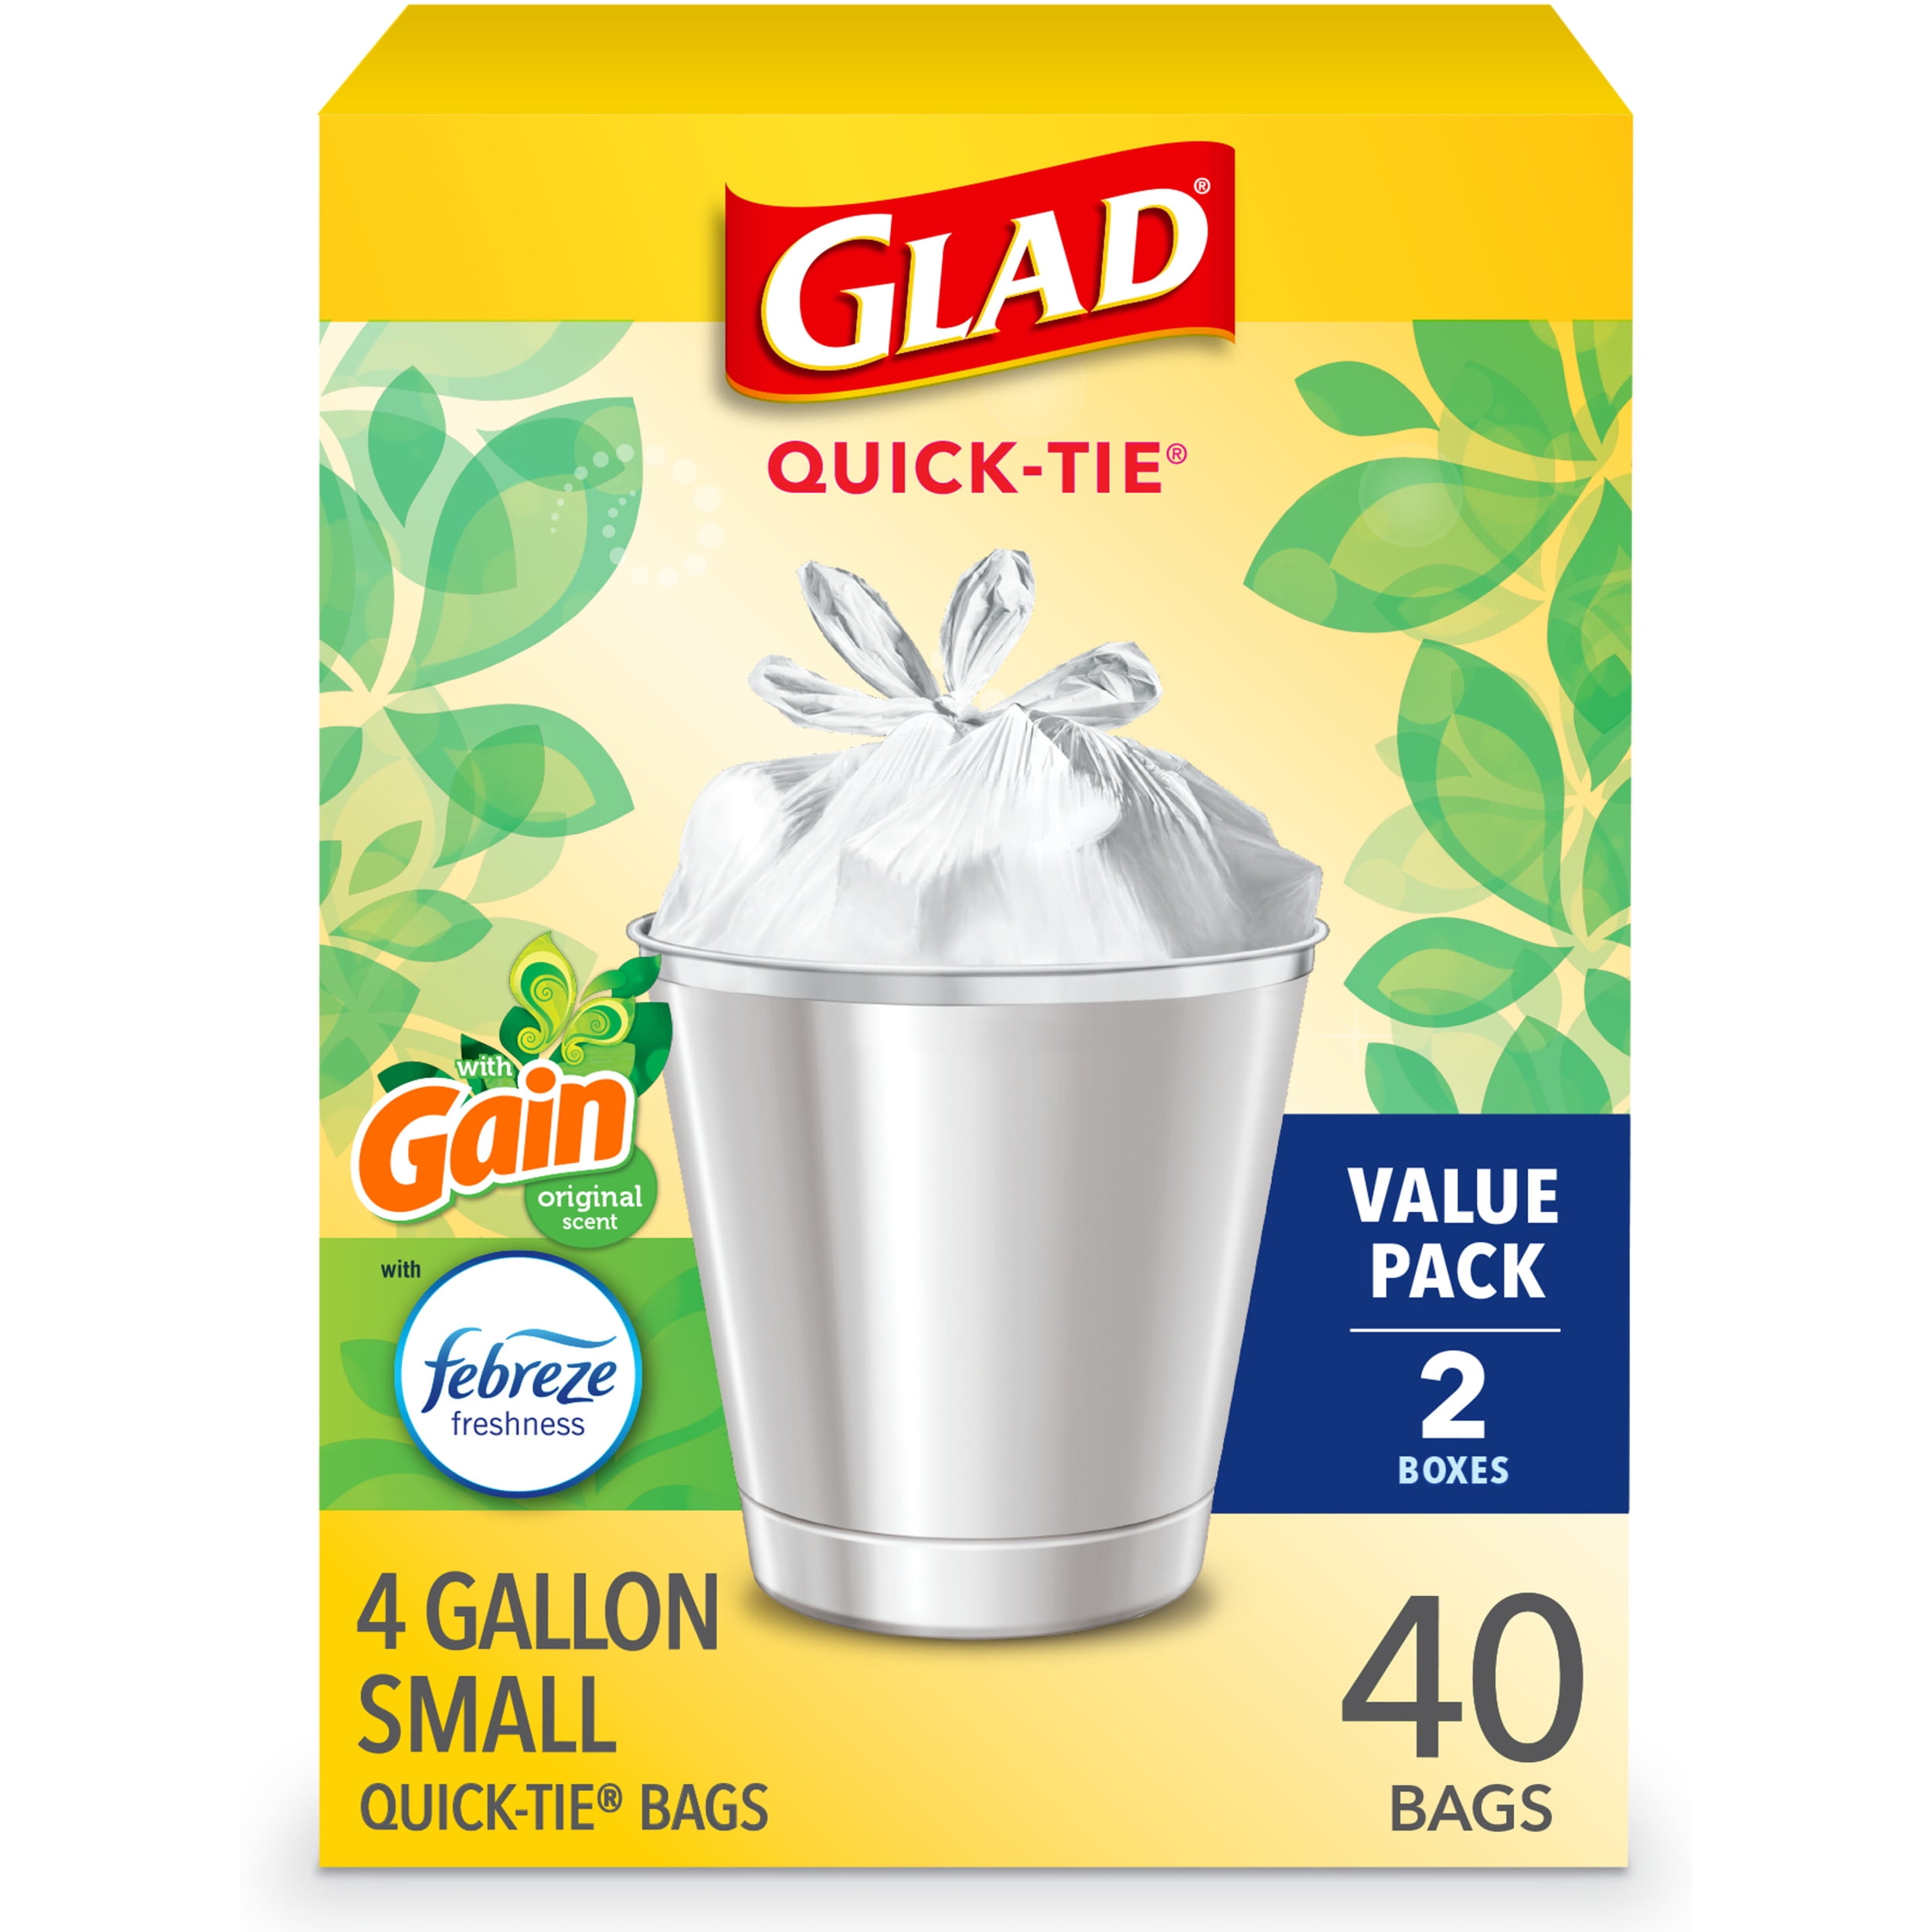 Glad - Glad, Garbage Bags, Small, 4 Gallon (30 count), Shop